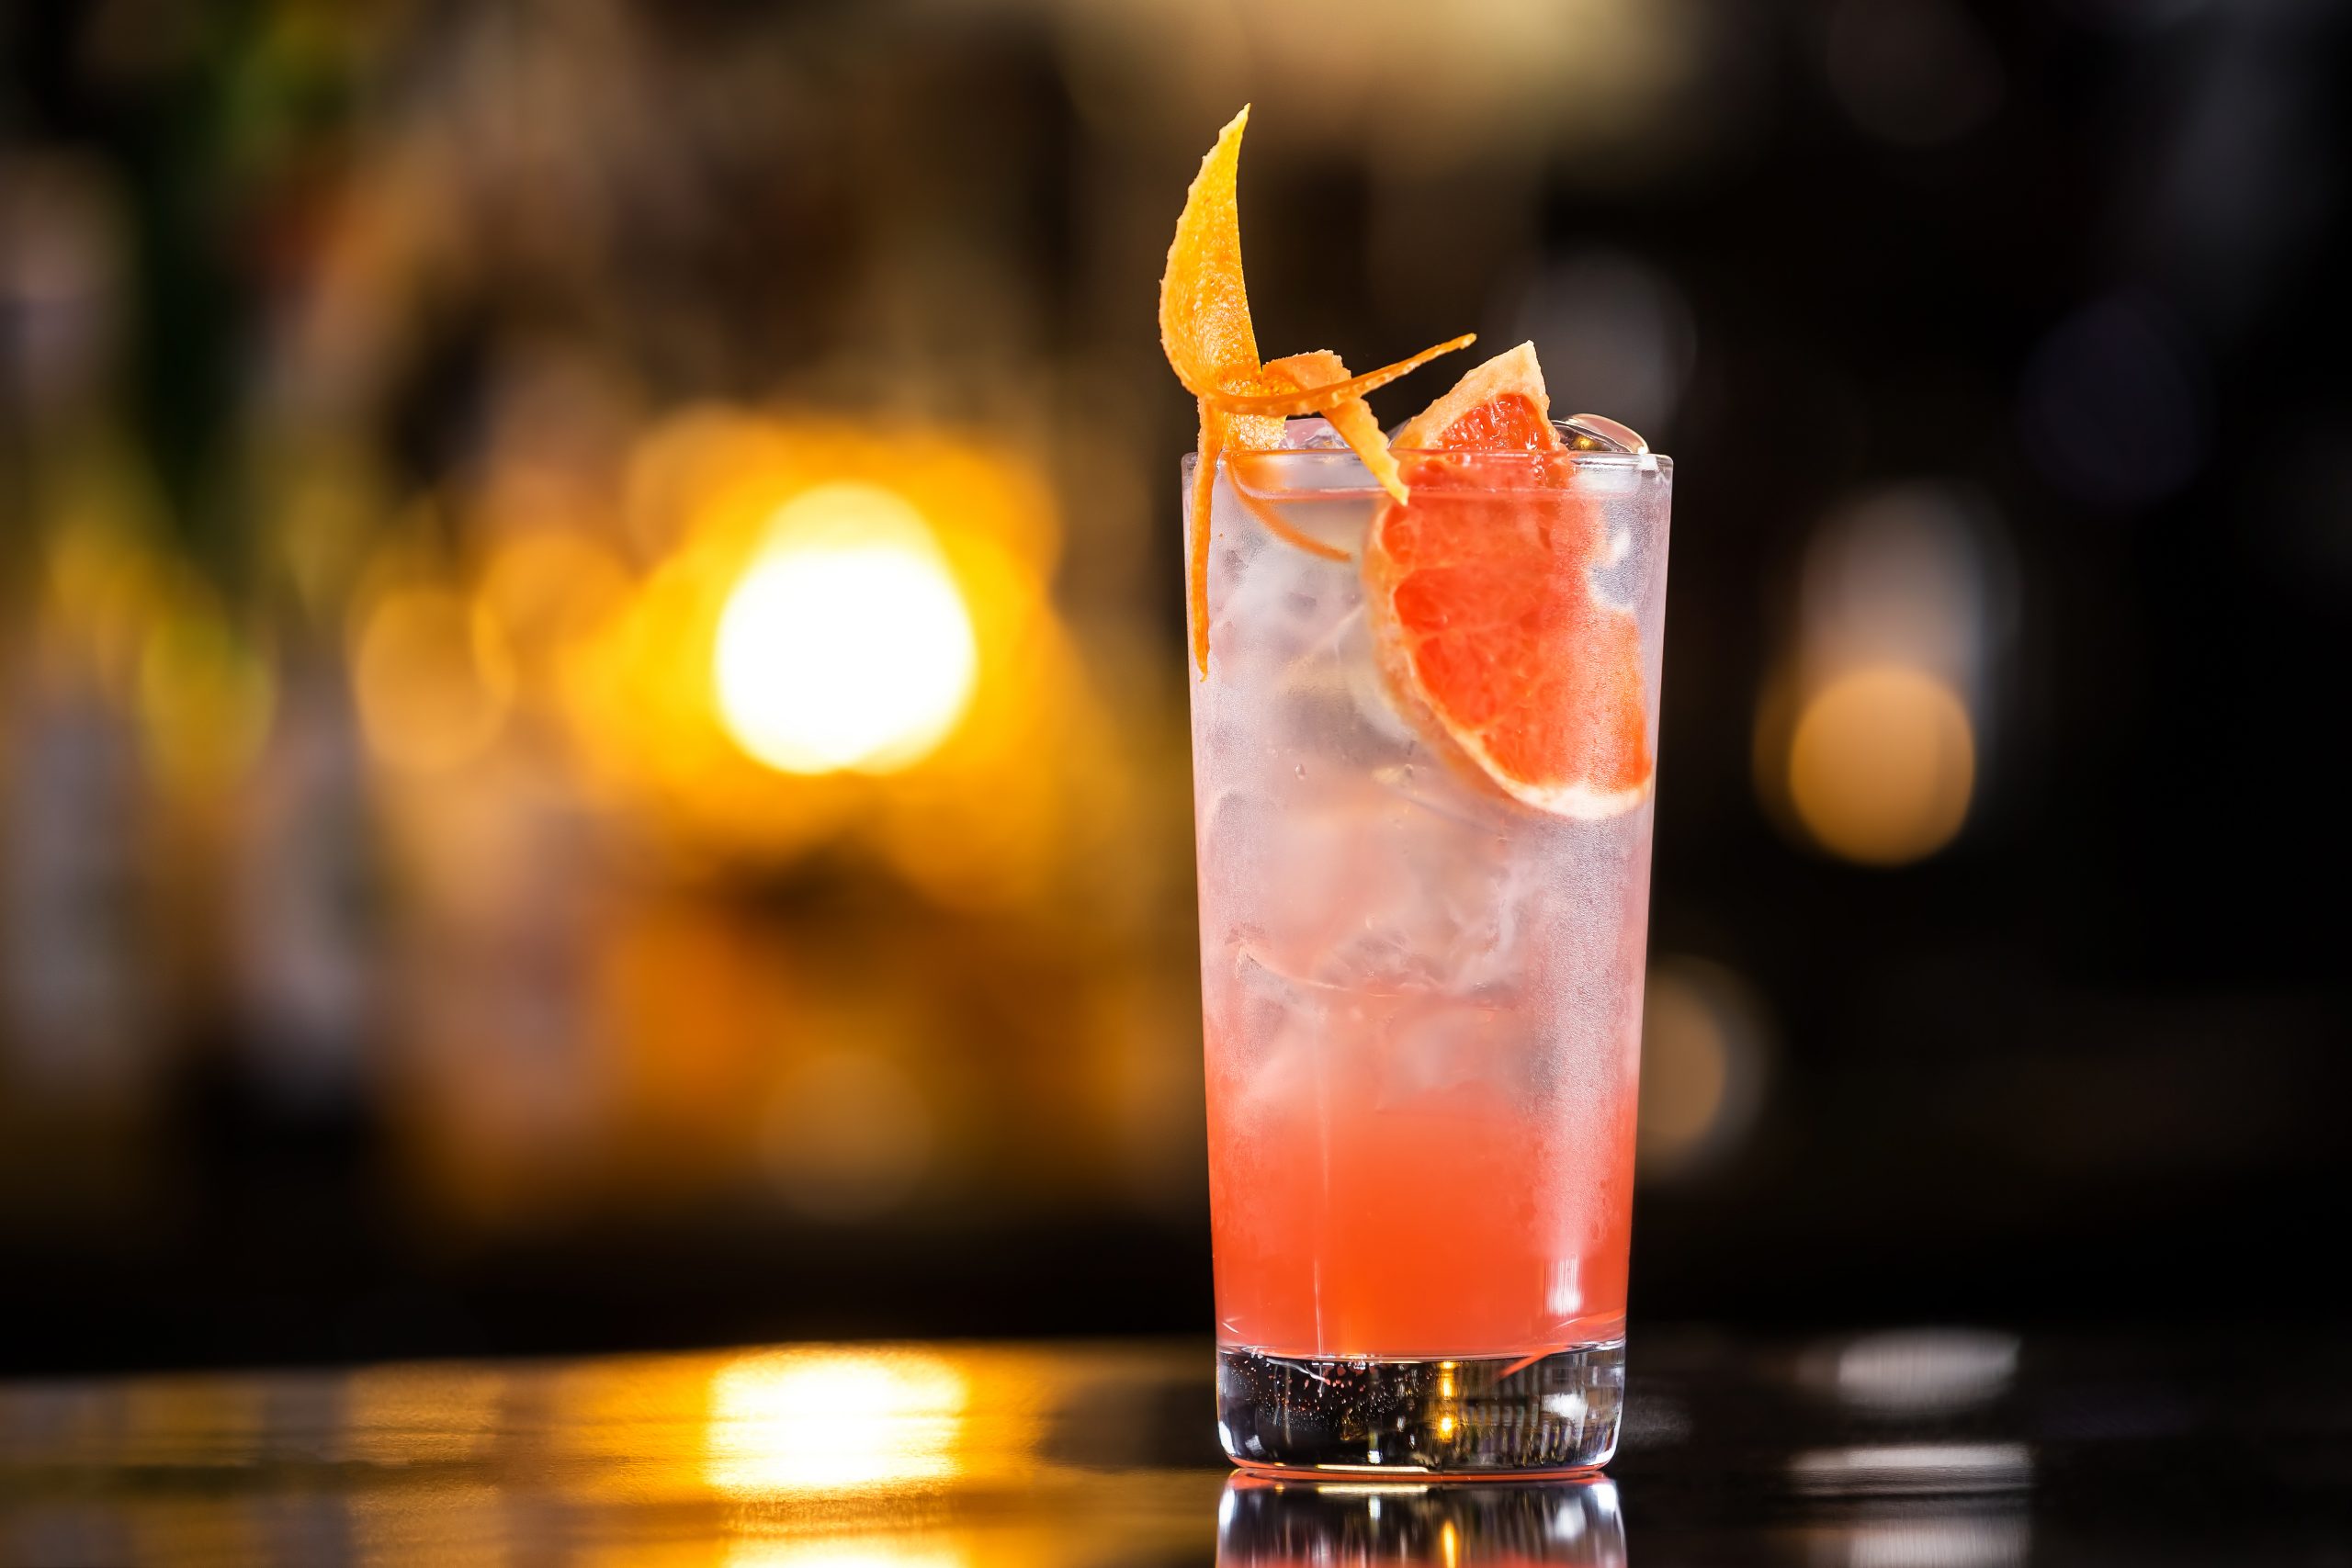 greyhound cocktail recipe and history